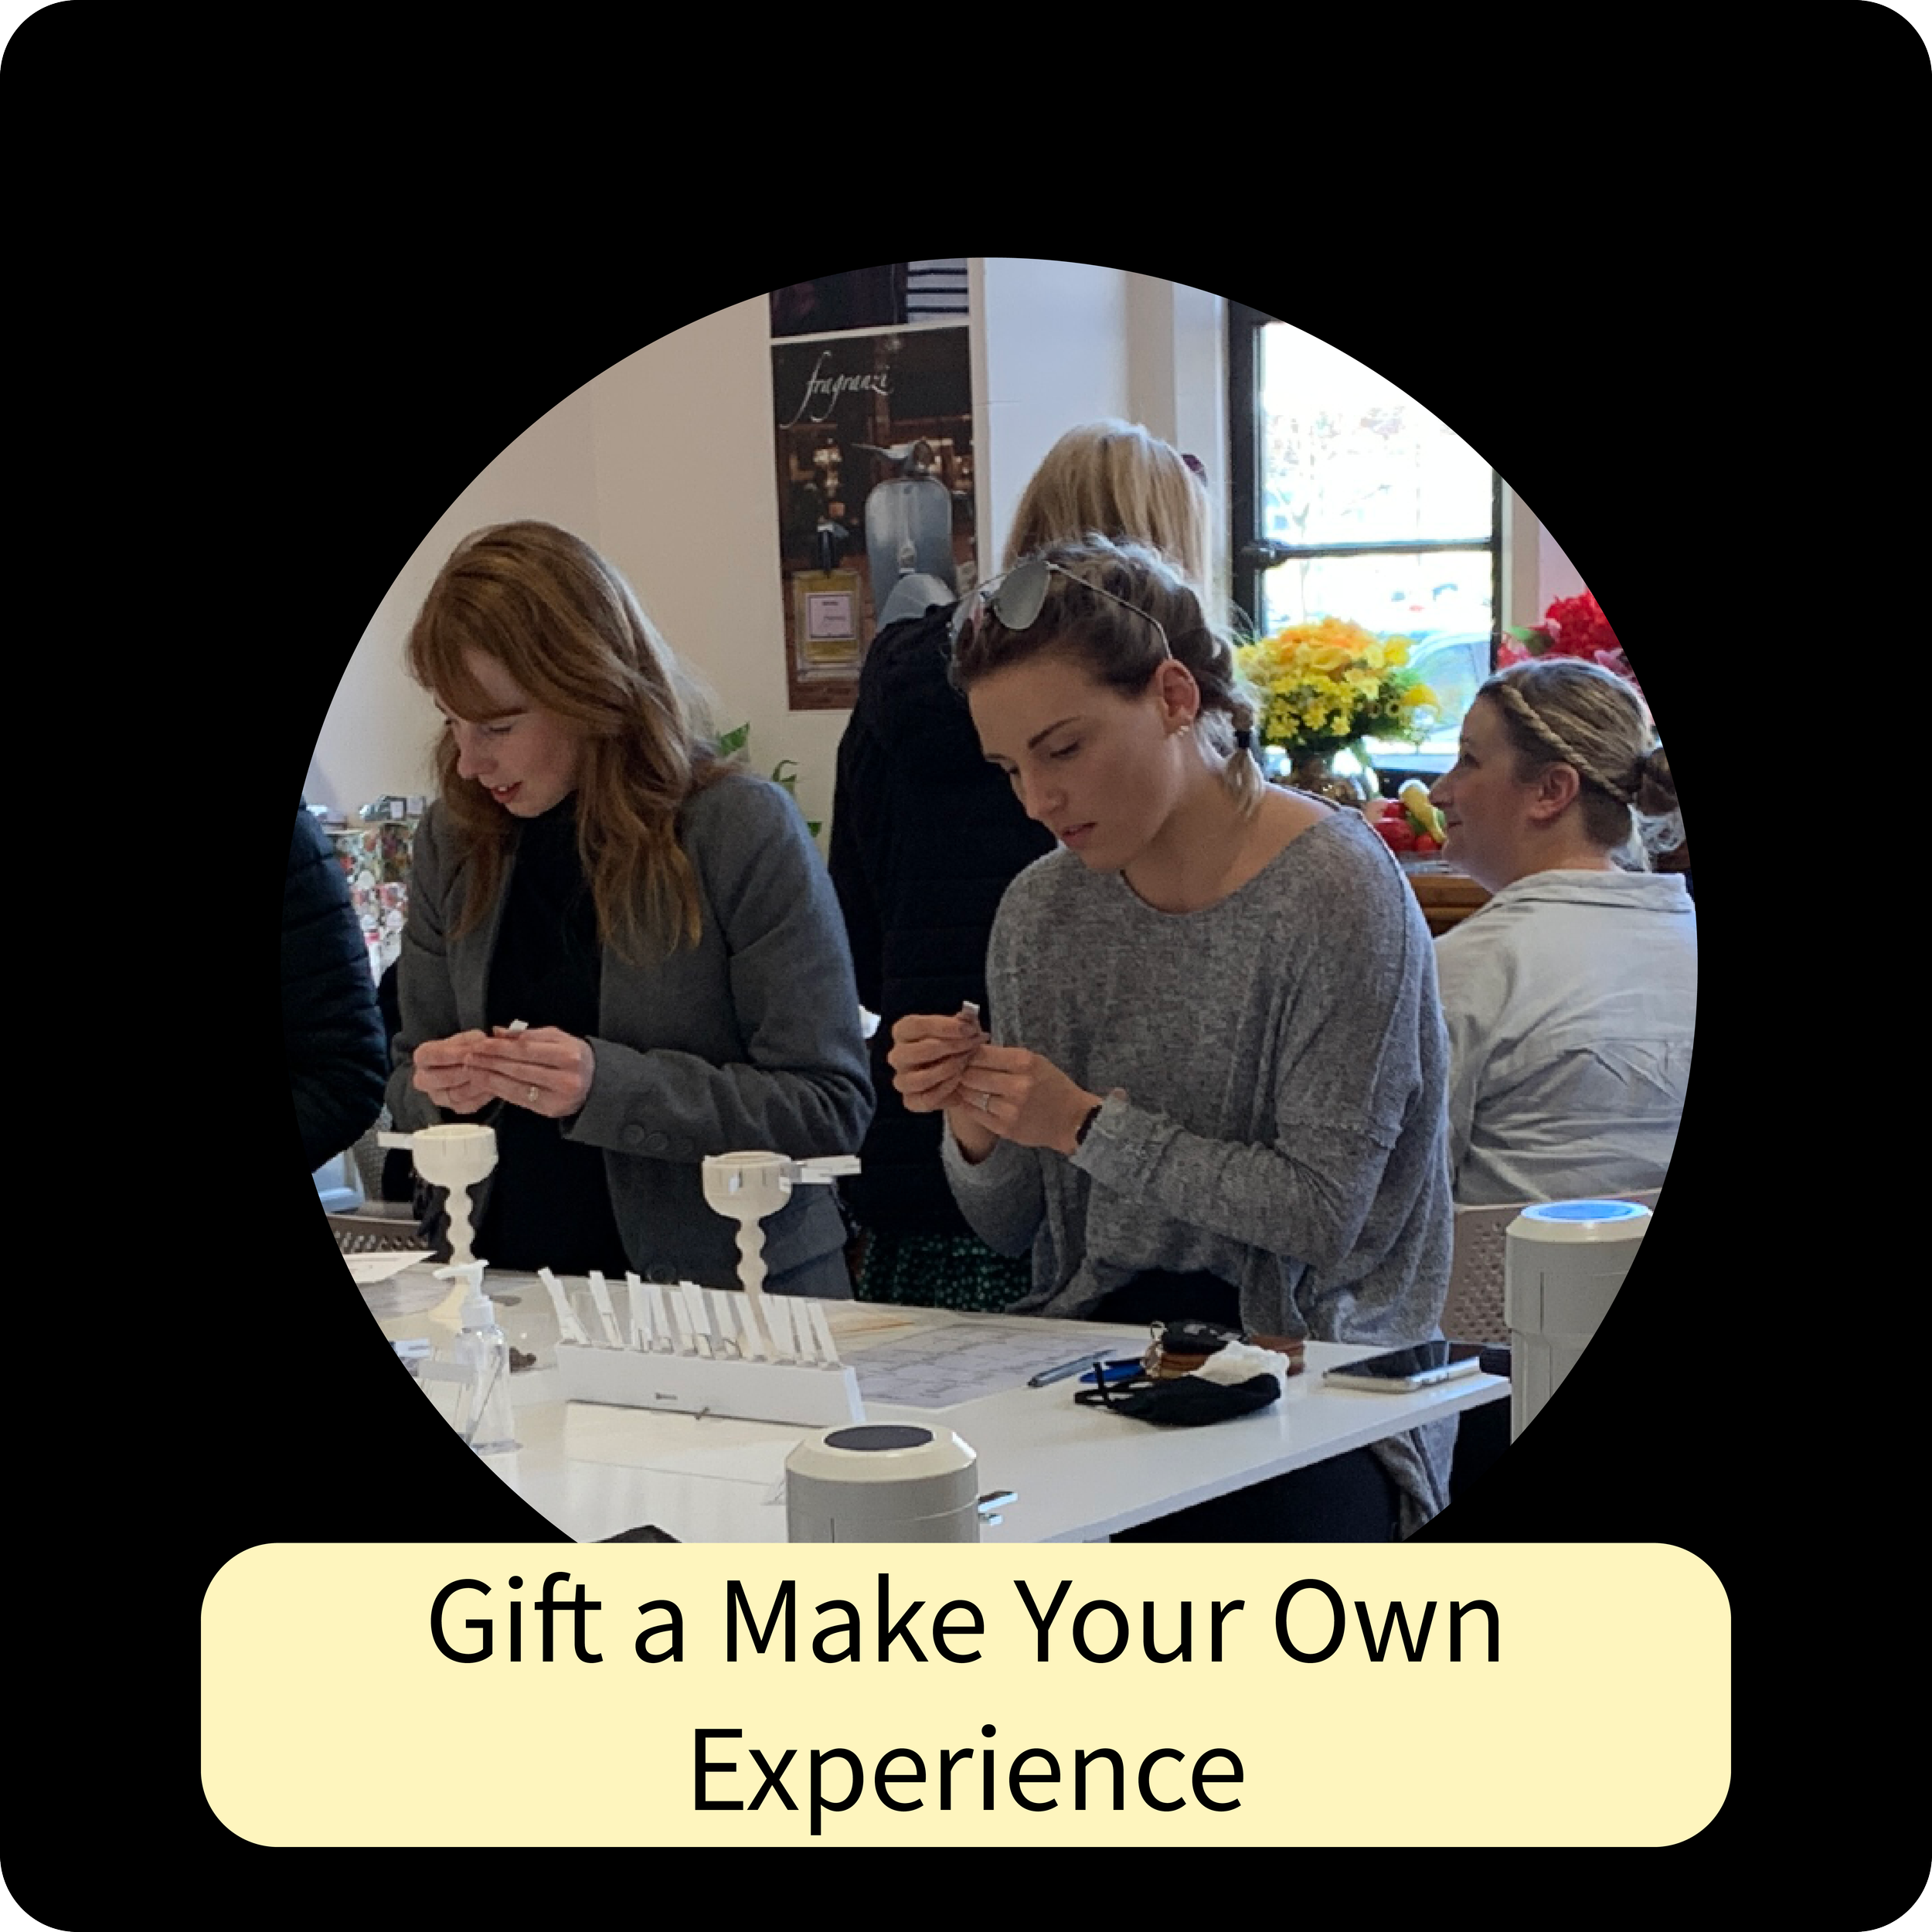 Gift a Make-Your-Own Fragrance Design Experience